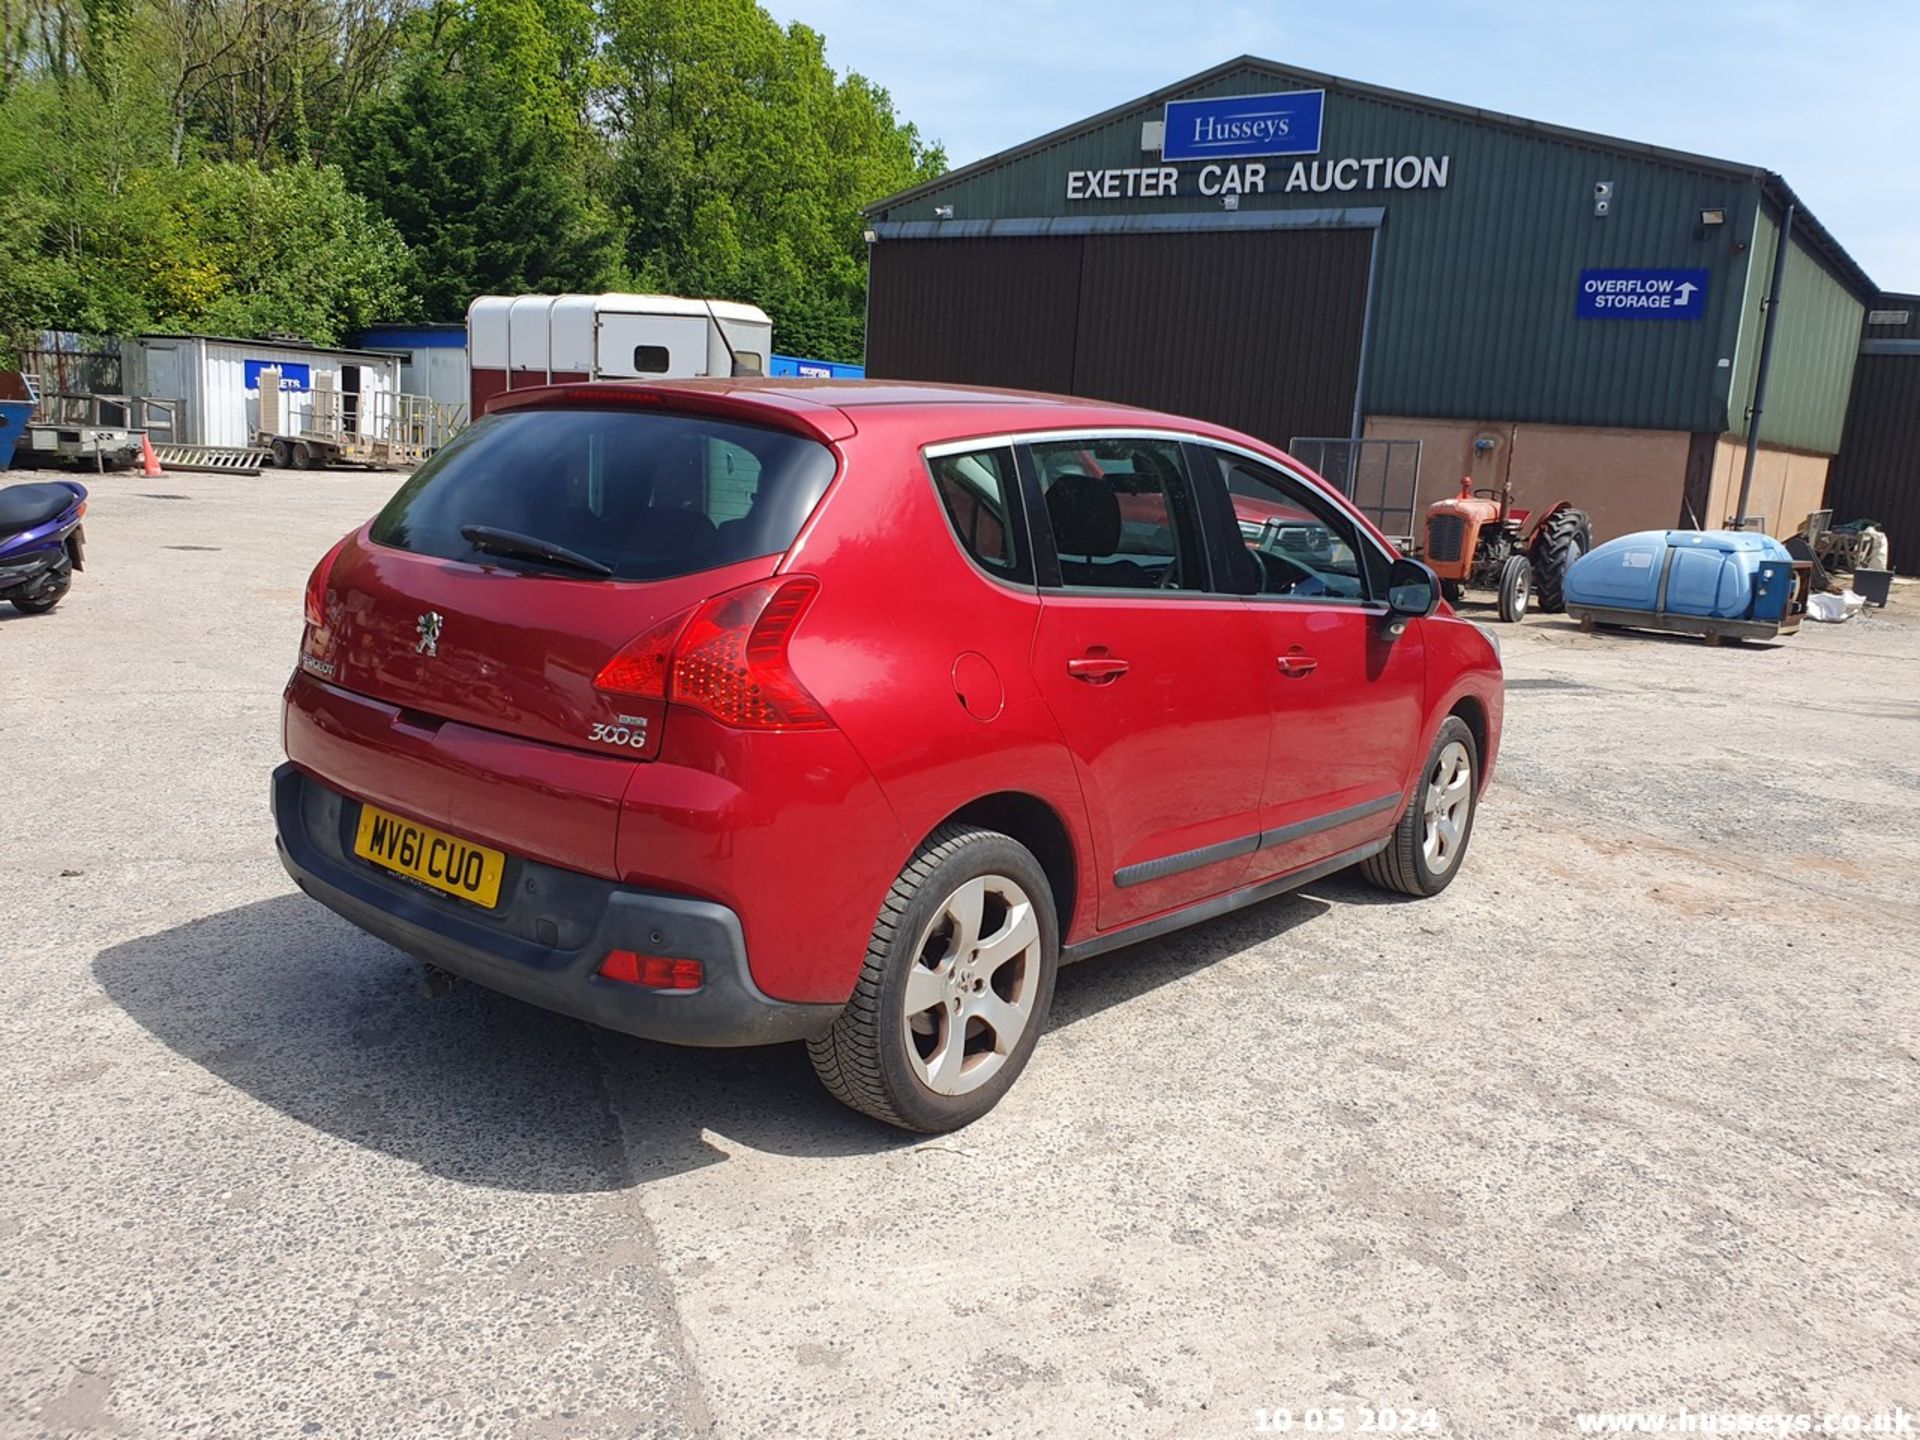 11/61 PEUGEOT 3008 SPORT E-HDI S-A - 1560cc 5dr Hatchback (Red, 89k) - Image 11 of 49